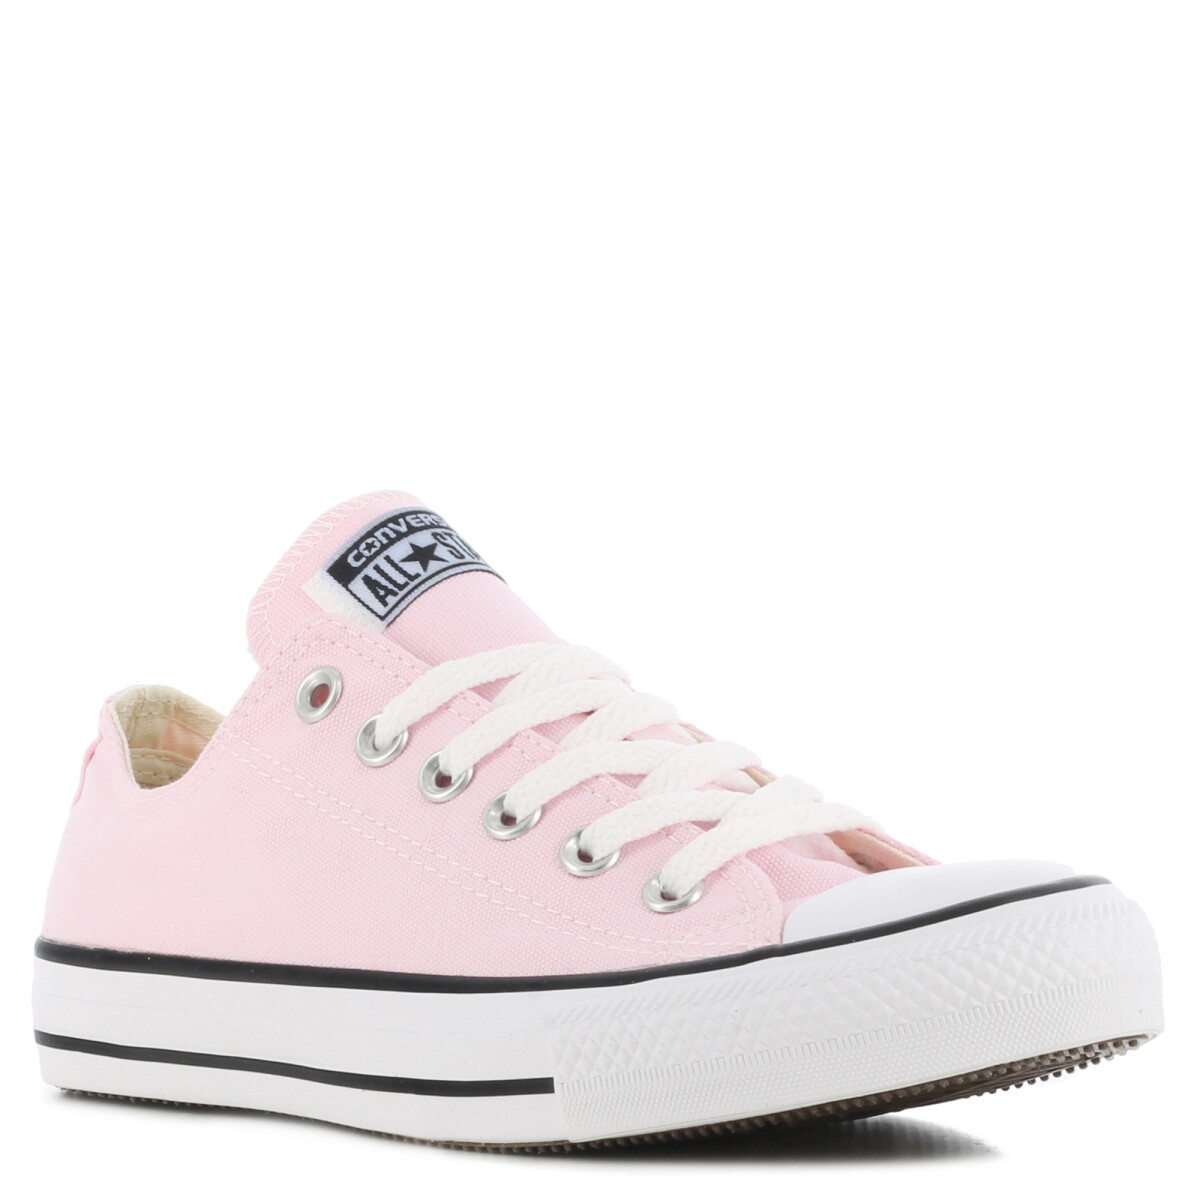 Classic - Basket Low Converse - All Star - Rosa 